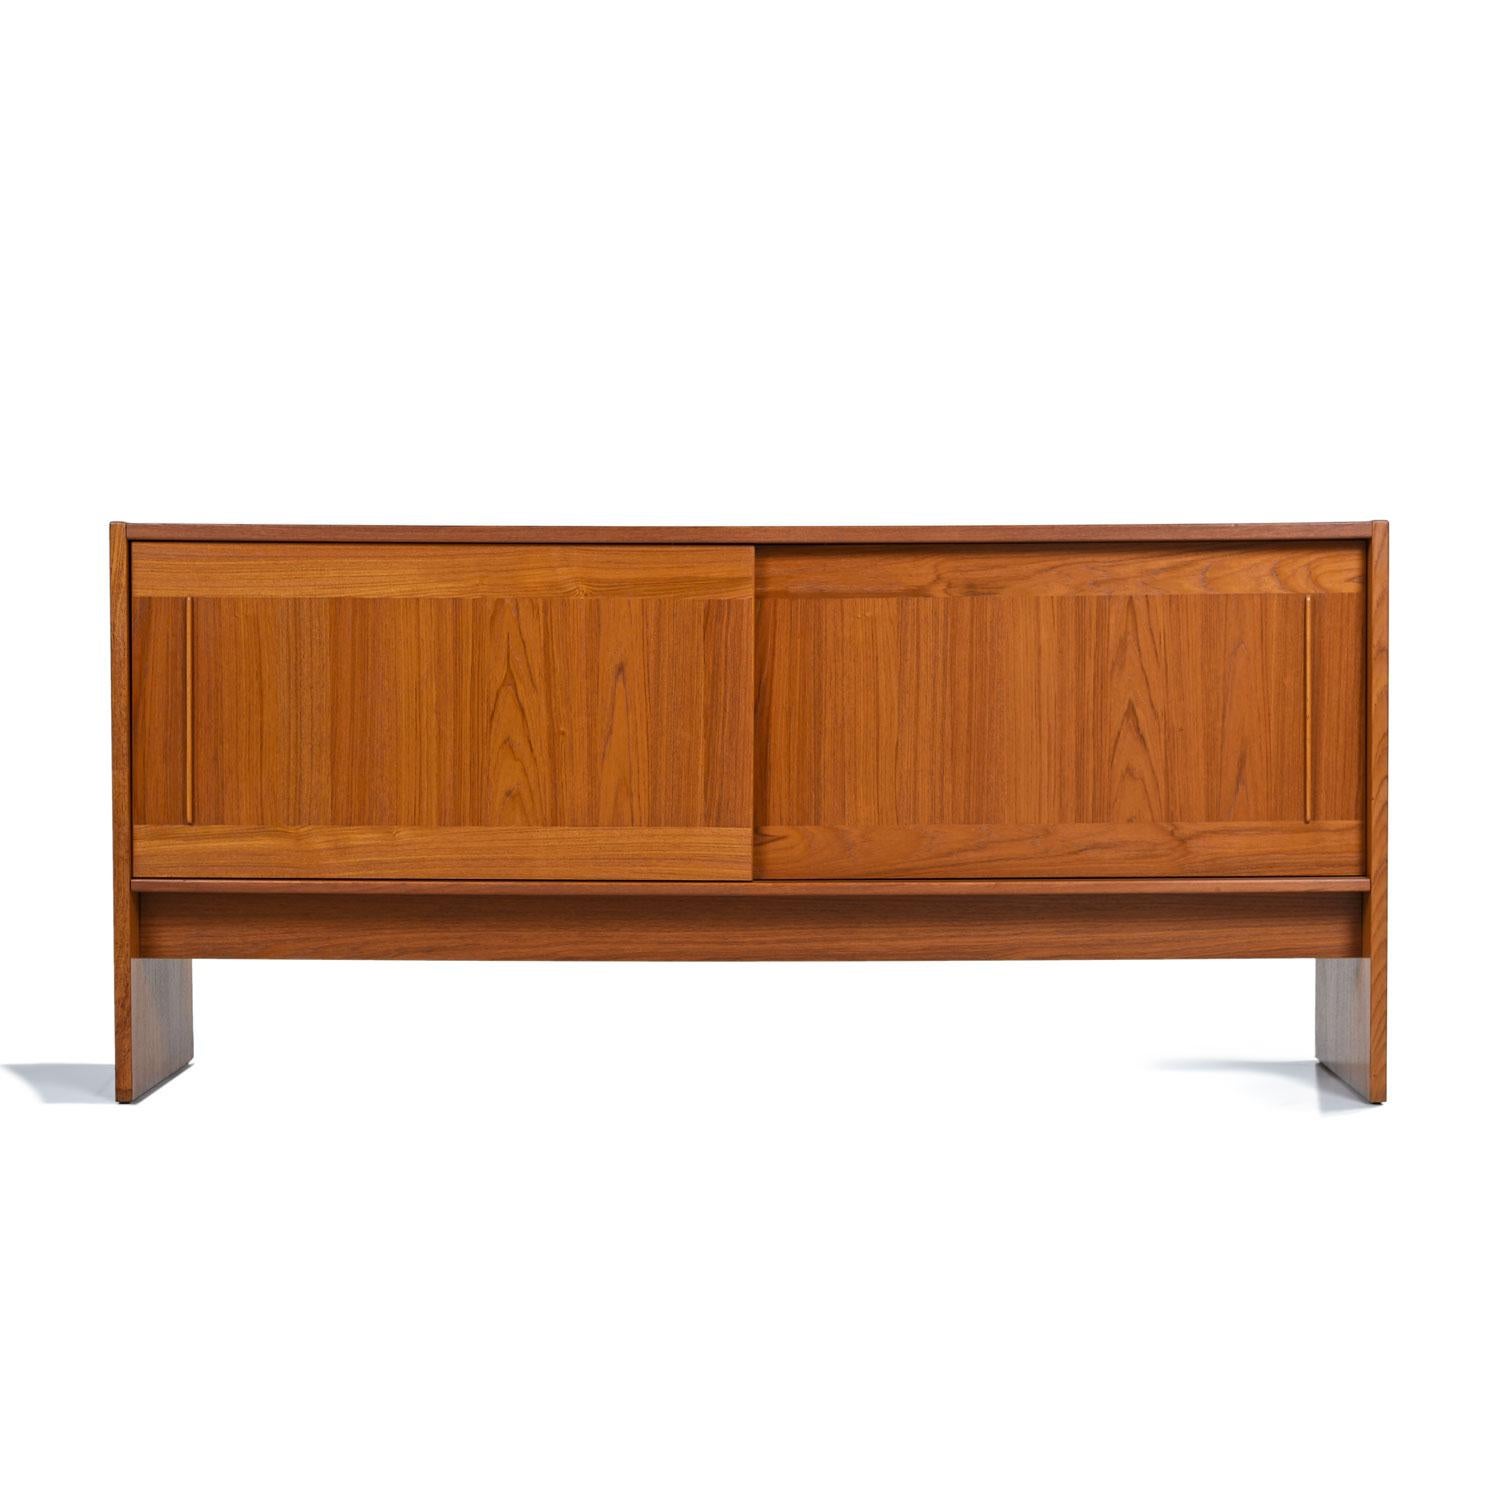 Mid-Century Modern Danish Teak Tile-Top Media Cabinet Credenza Buffet Signed by the Artist, 1980s